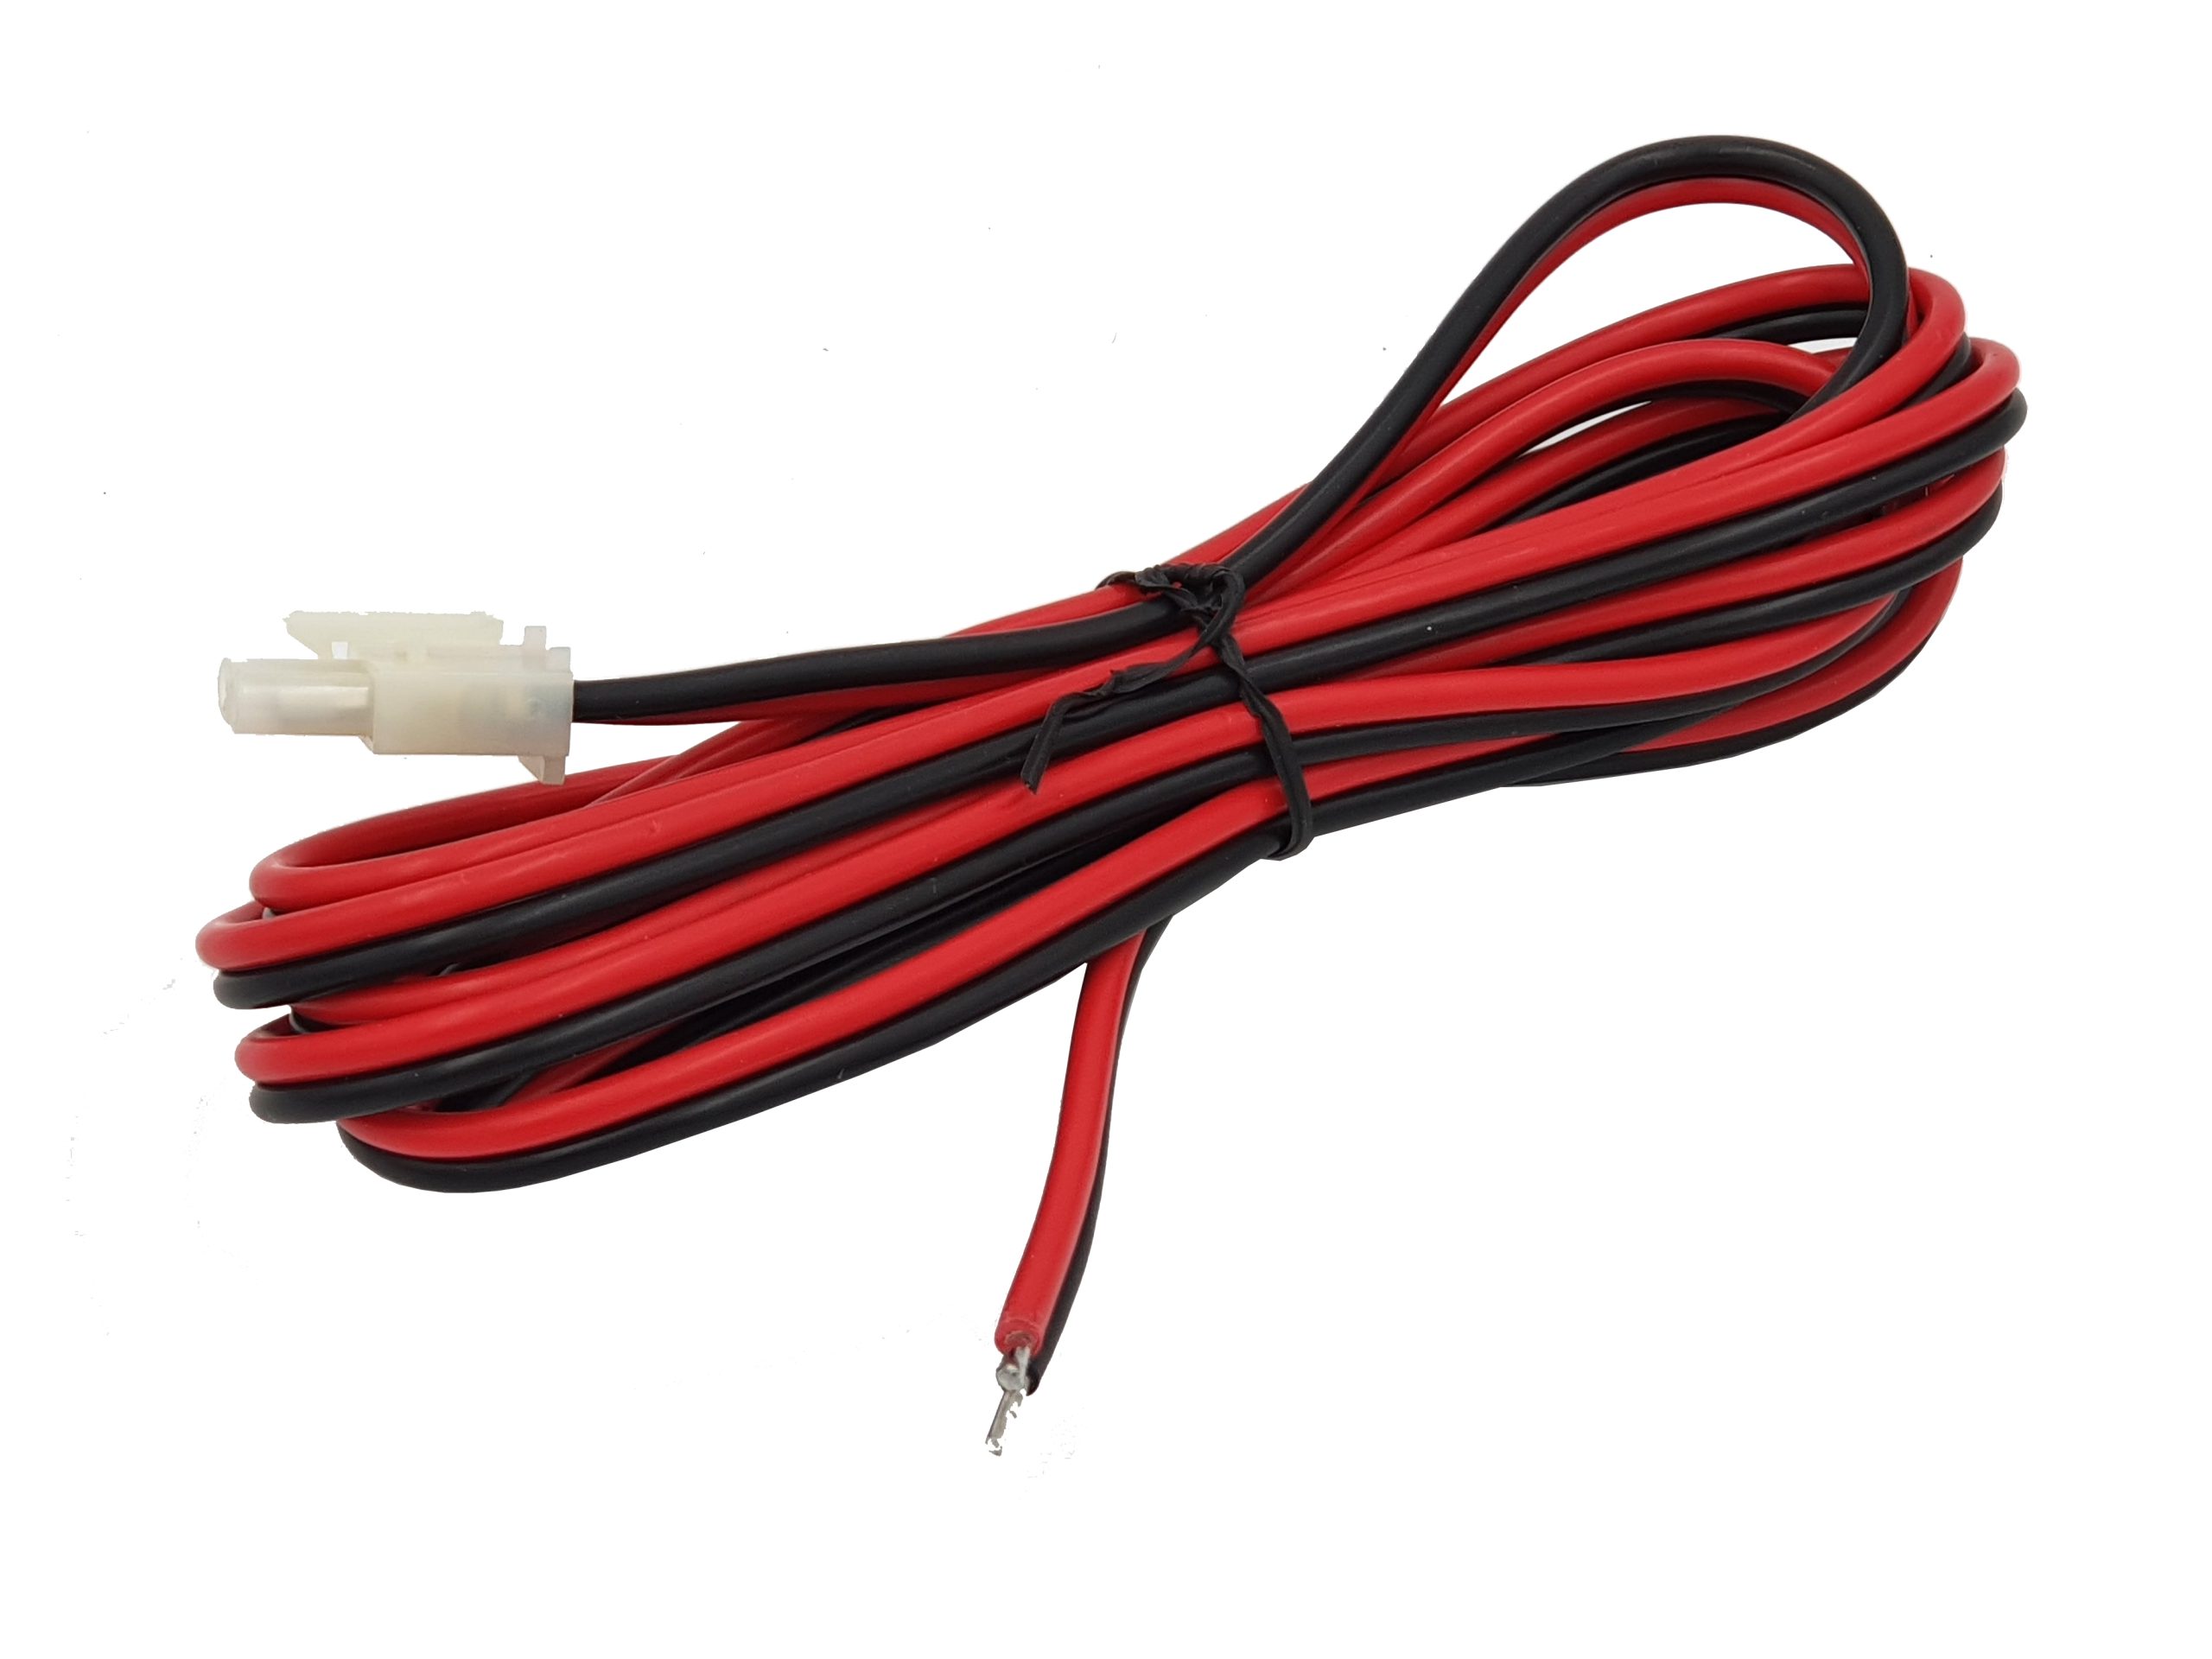 DC Powercord President Lincoln 1